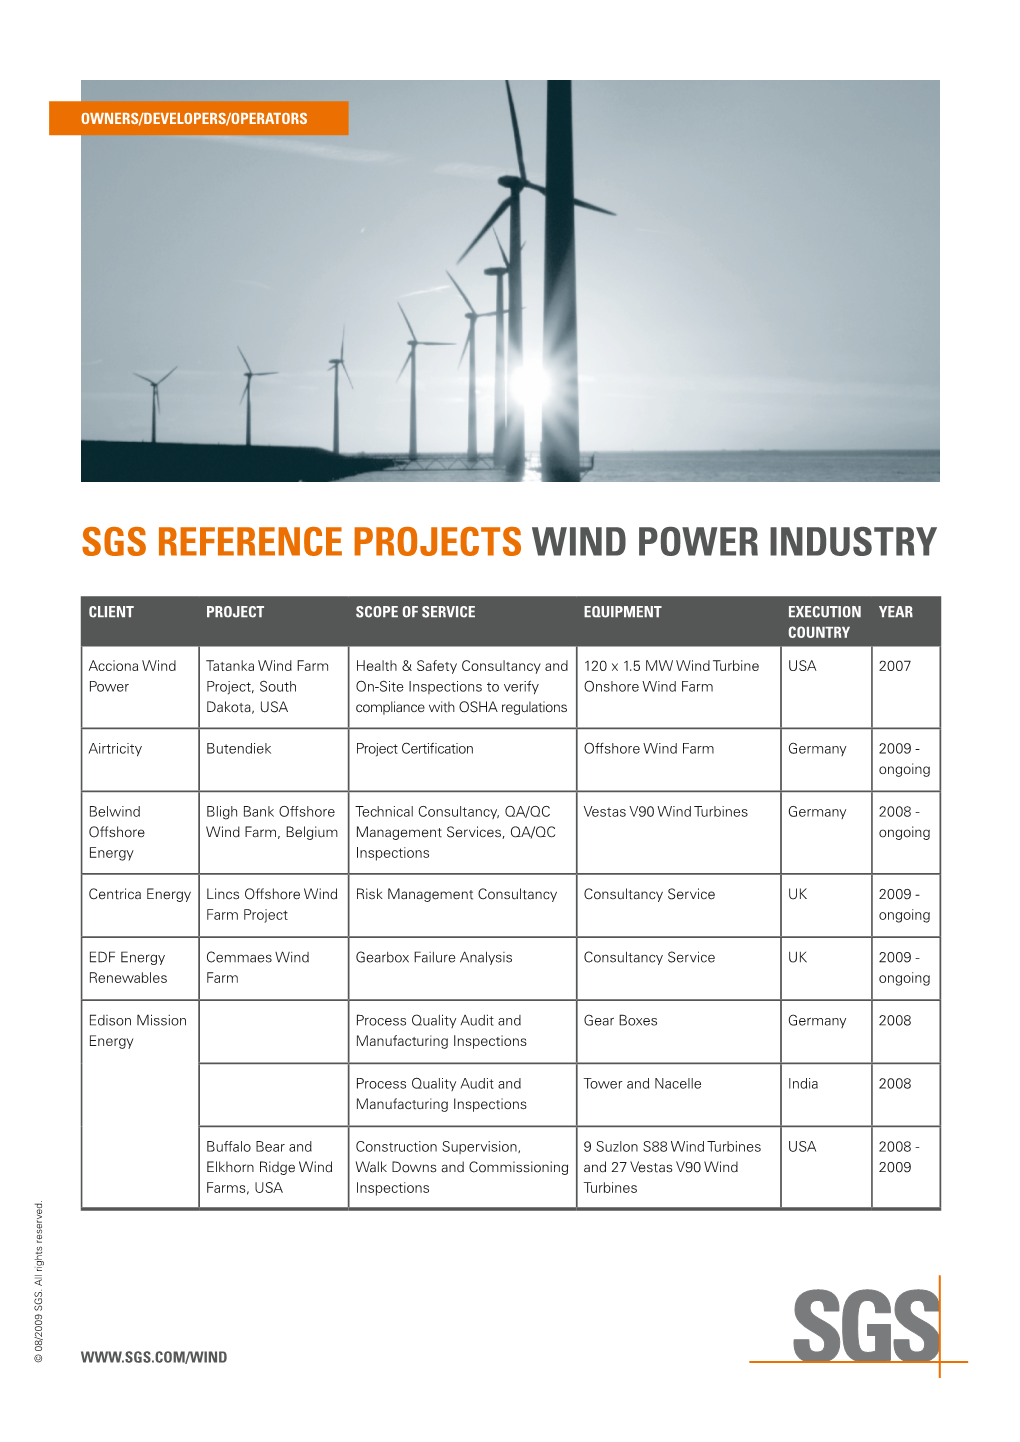 Sgs Reference Projects Wind Power Industry